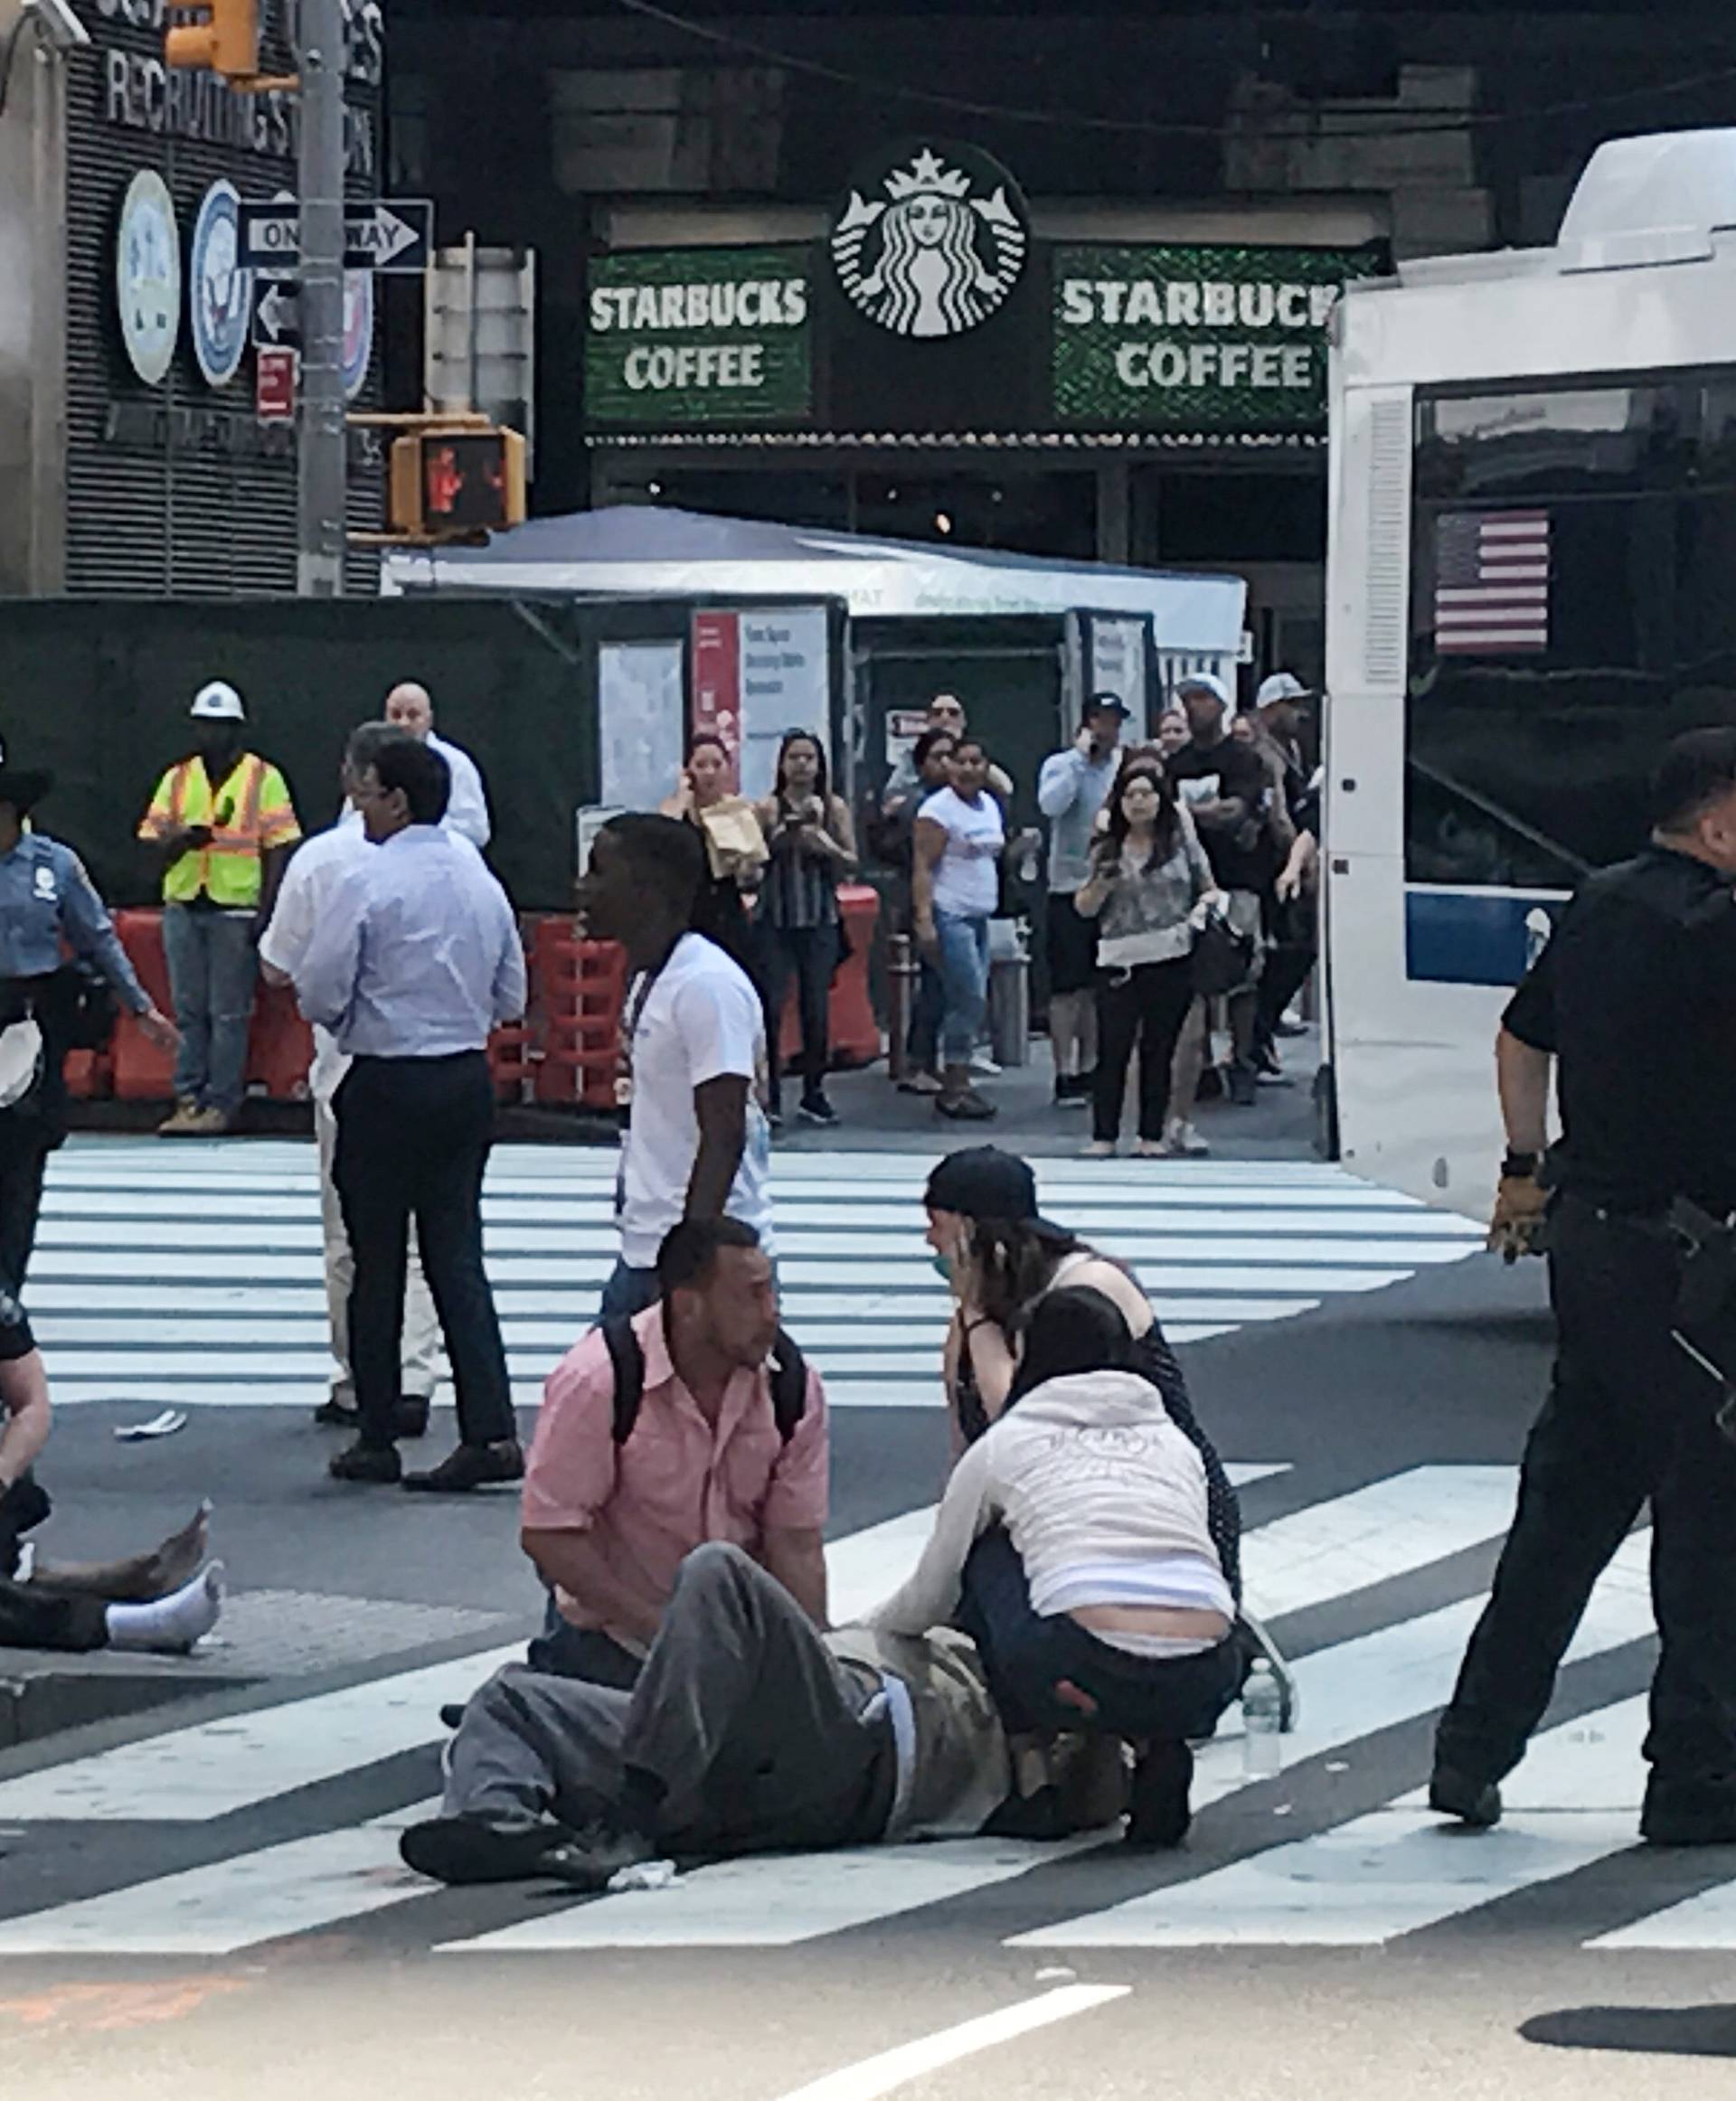 First responders are at the scene as people help injured pedestrians after a vehicle struck pedestrians on a sidewalk in Times Square in New York